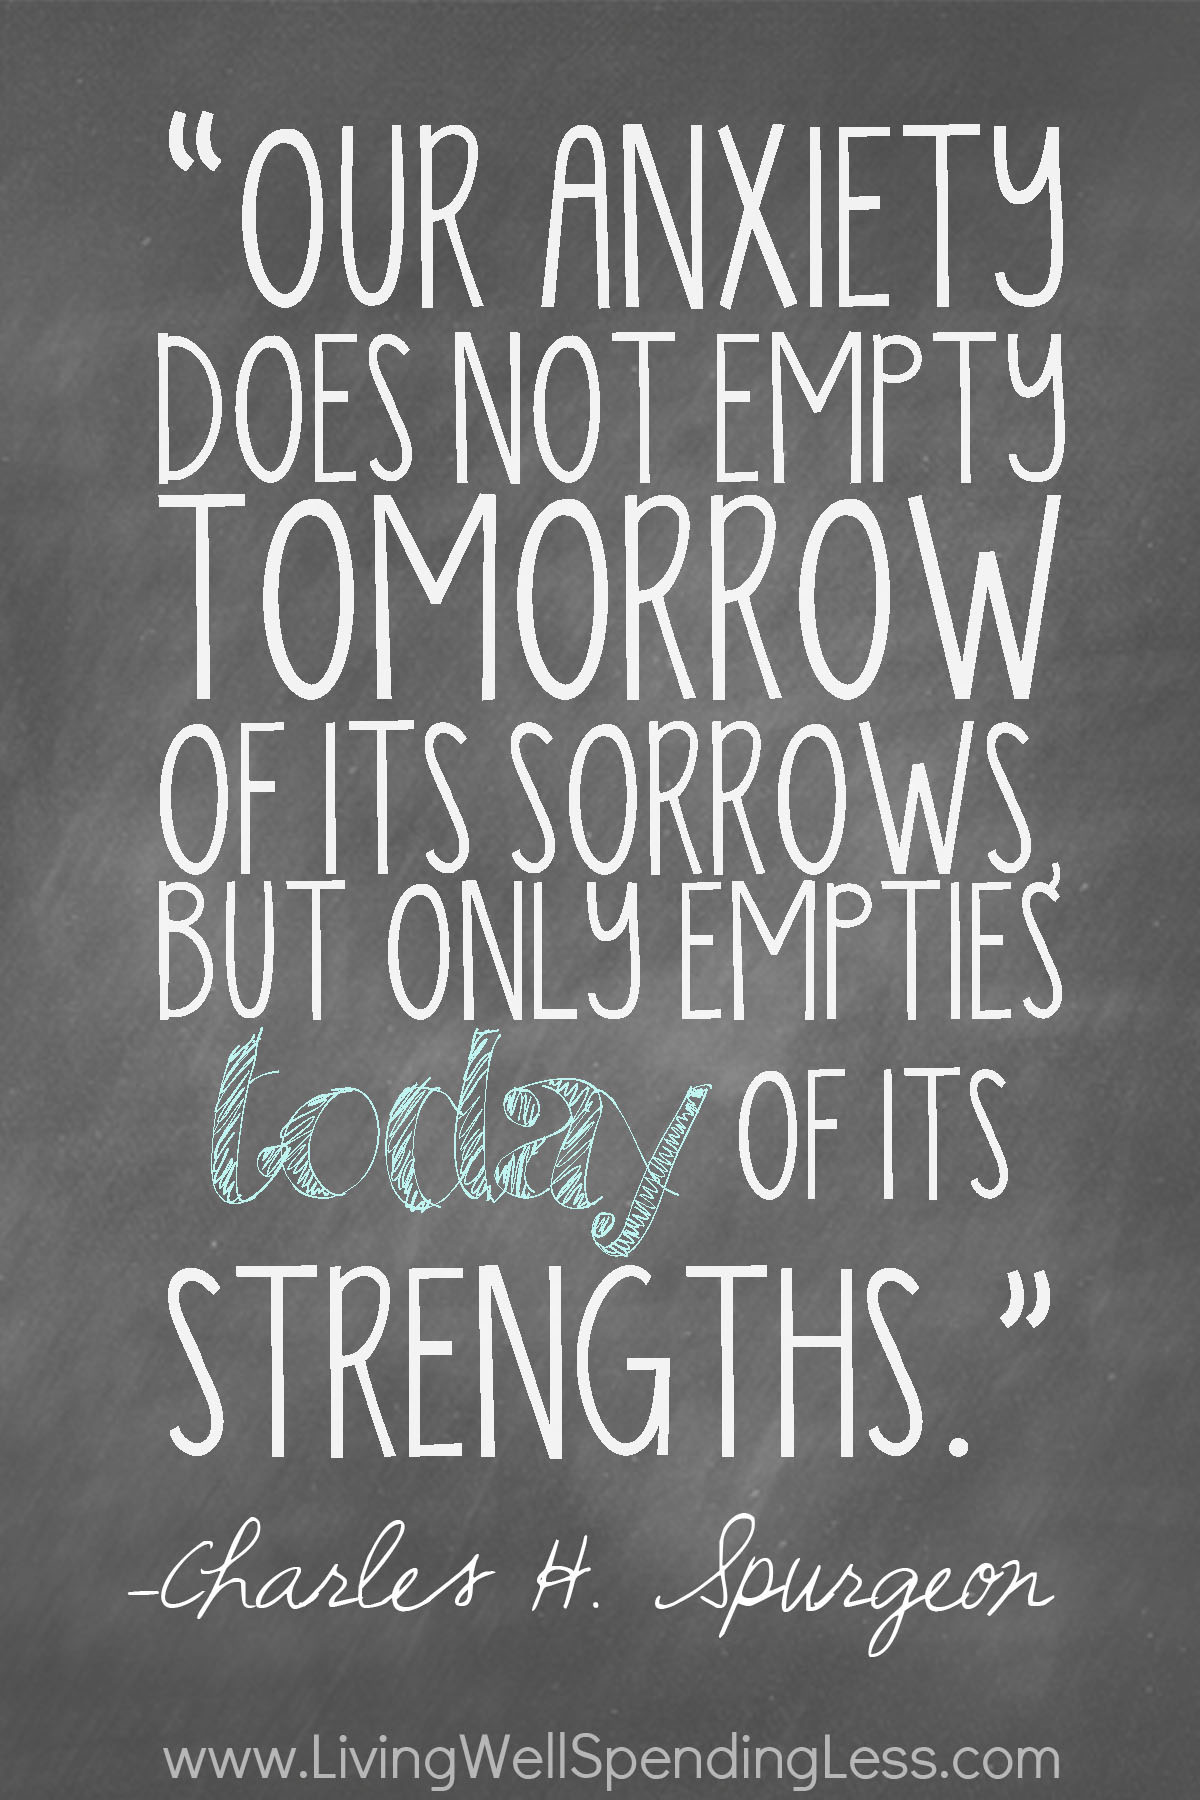 Anxiety does not empty tomorrow of its sorrows, but only empties today of its strength - Charles Spurgeon